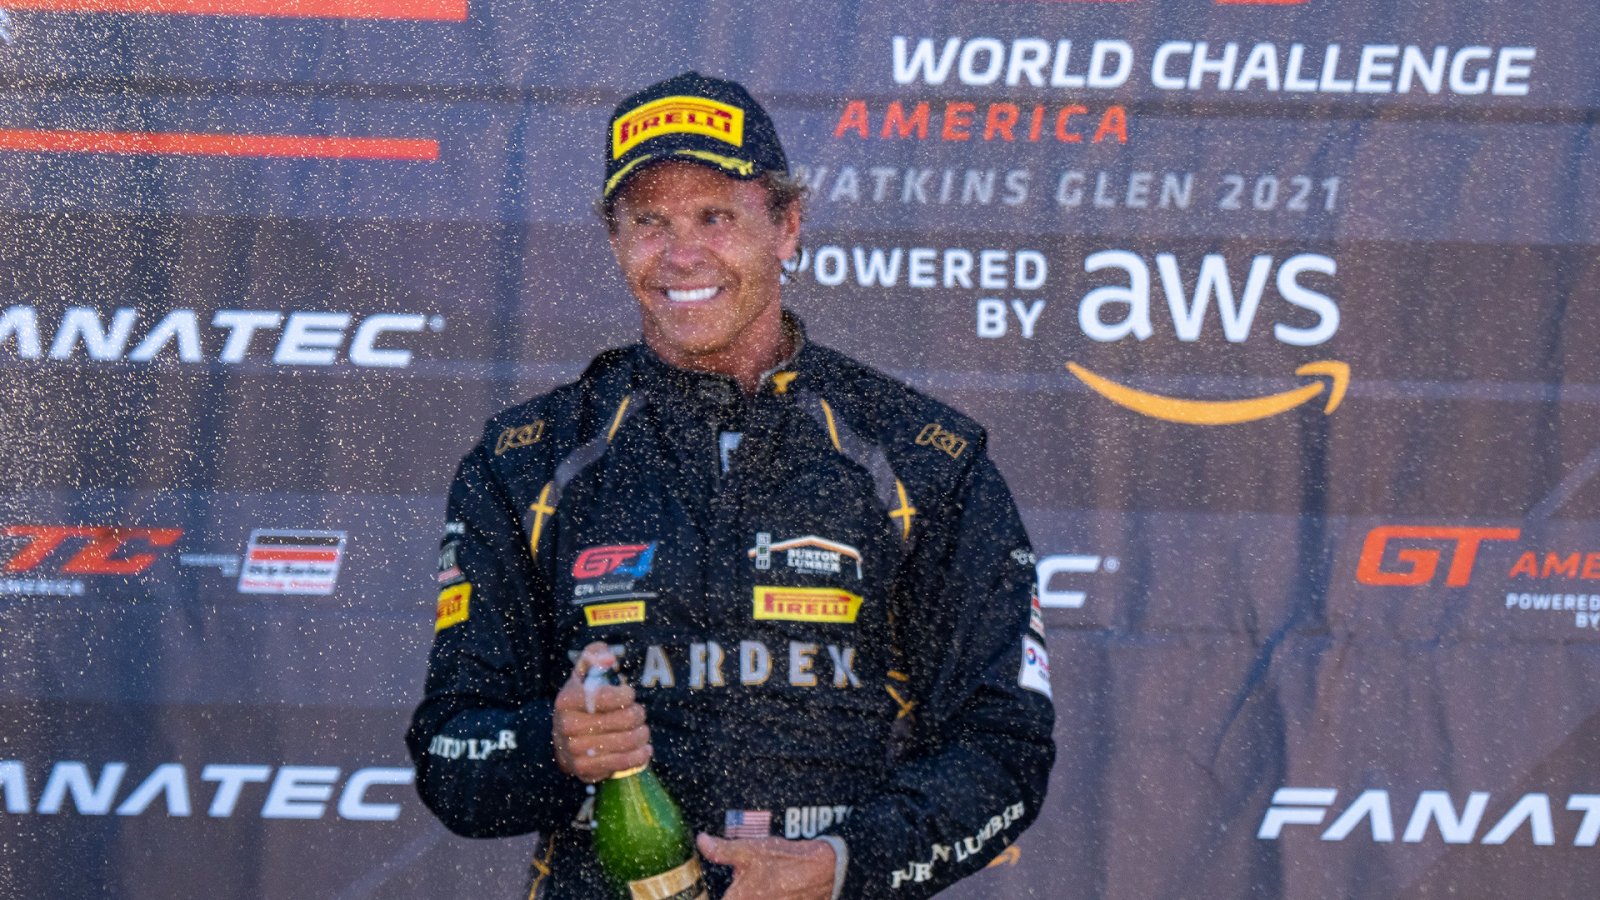 Jeff Burton, Rearden Racing Head to Indianapolis Seeking More Wins This Weekend in GT America Sprint Action with Lamborghini GT3